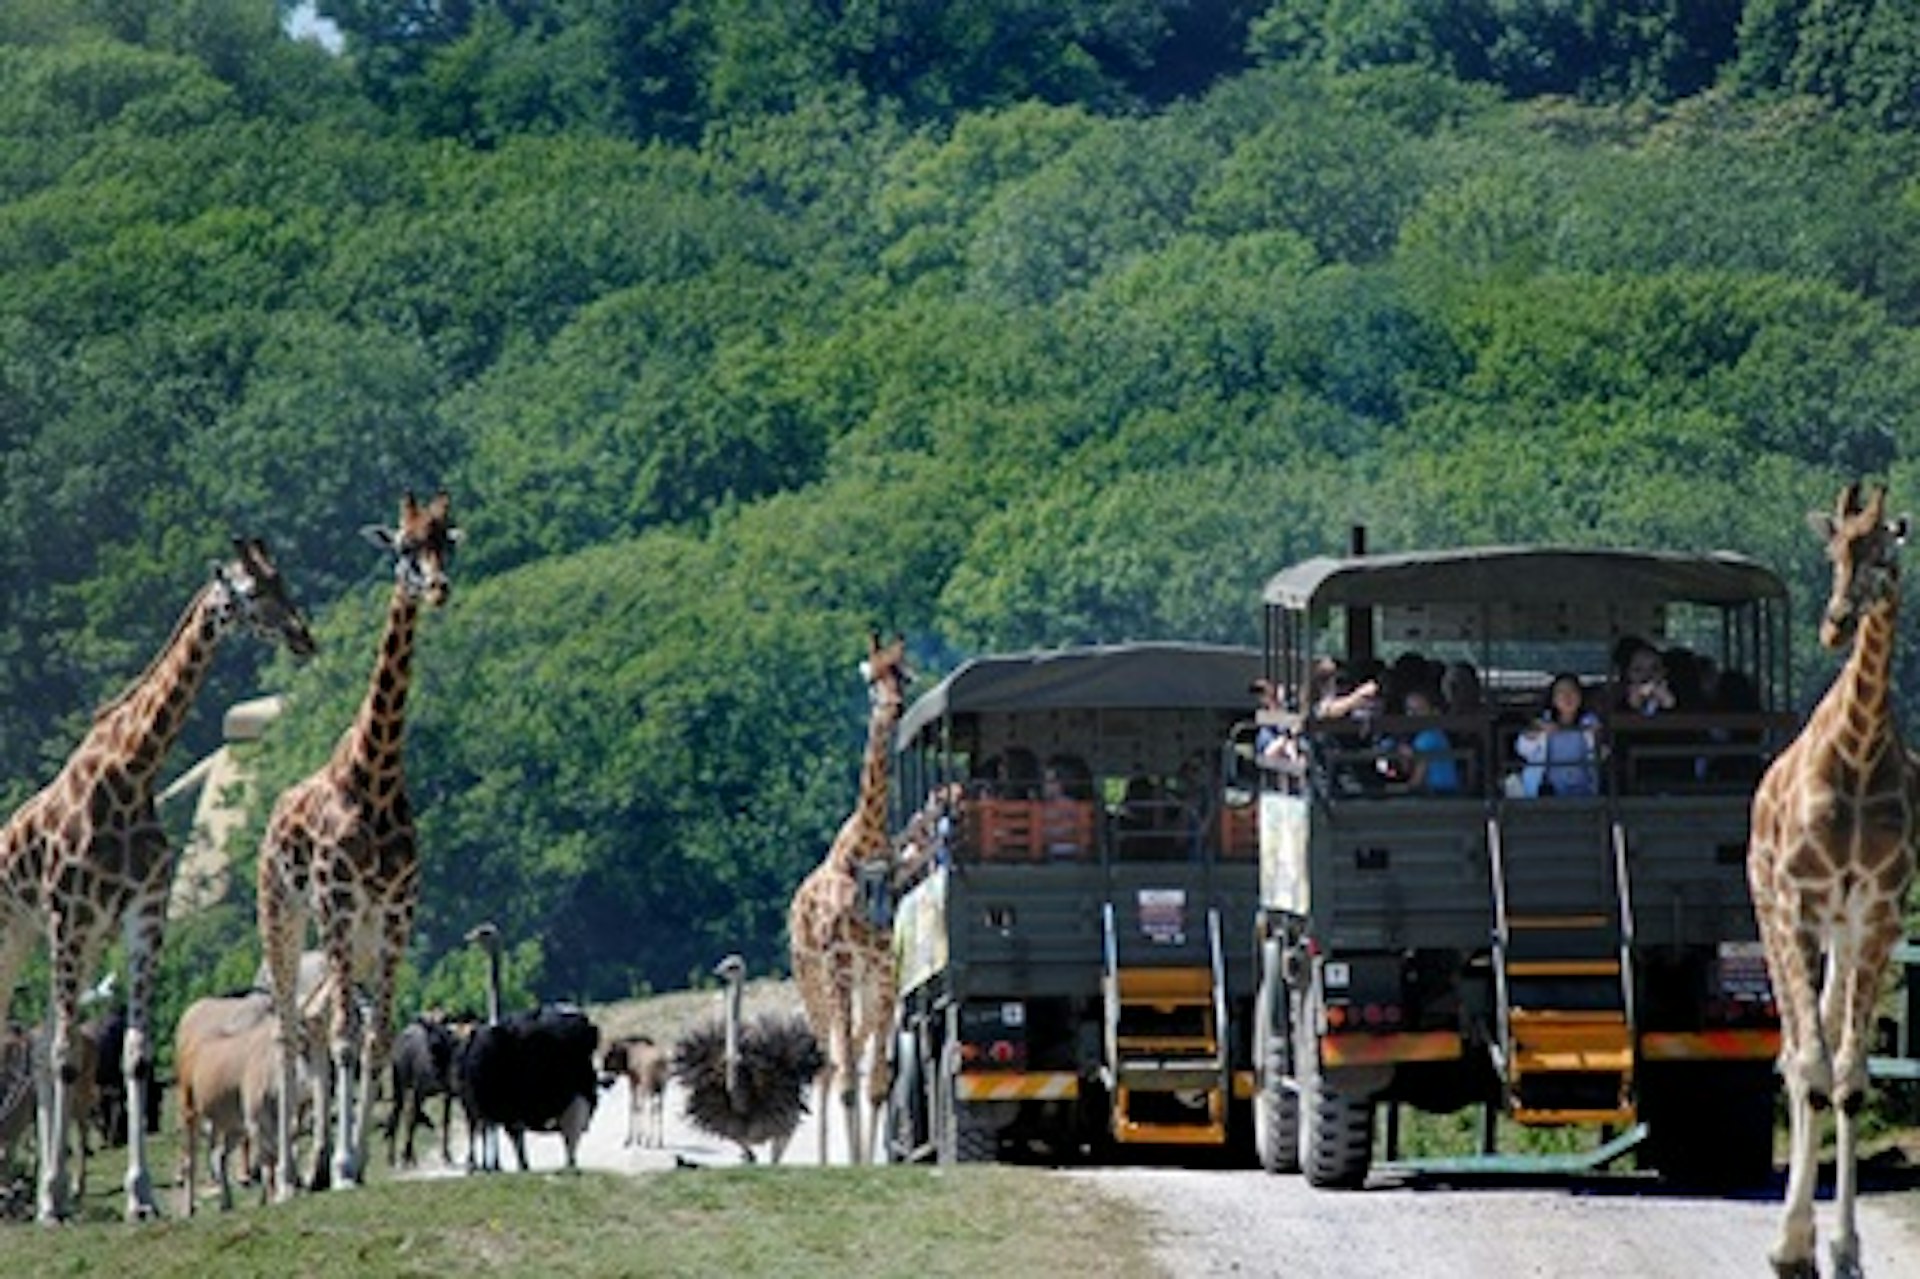 Visit to Port Lympne Reserve and Truck Safari for a Family of Four with Shared Animal Adoption 1